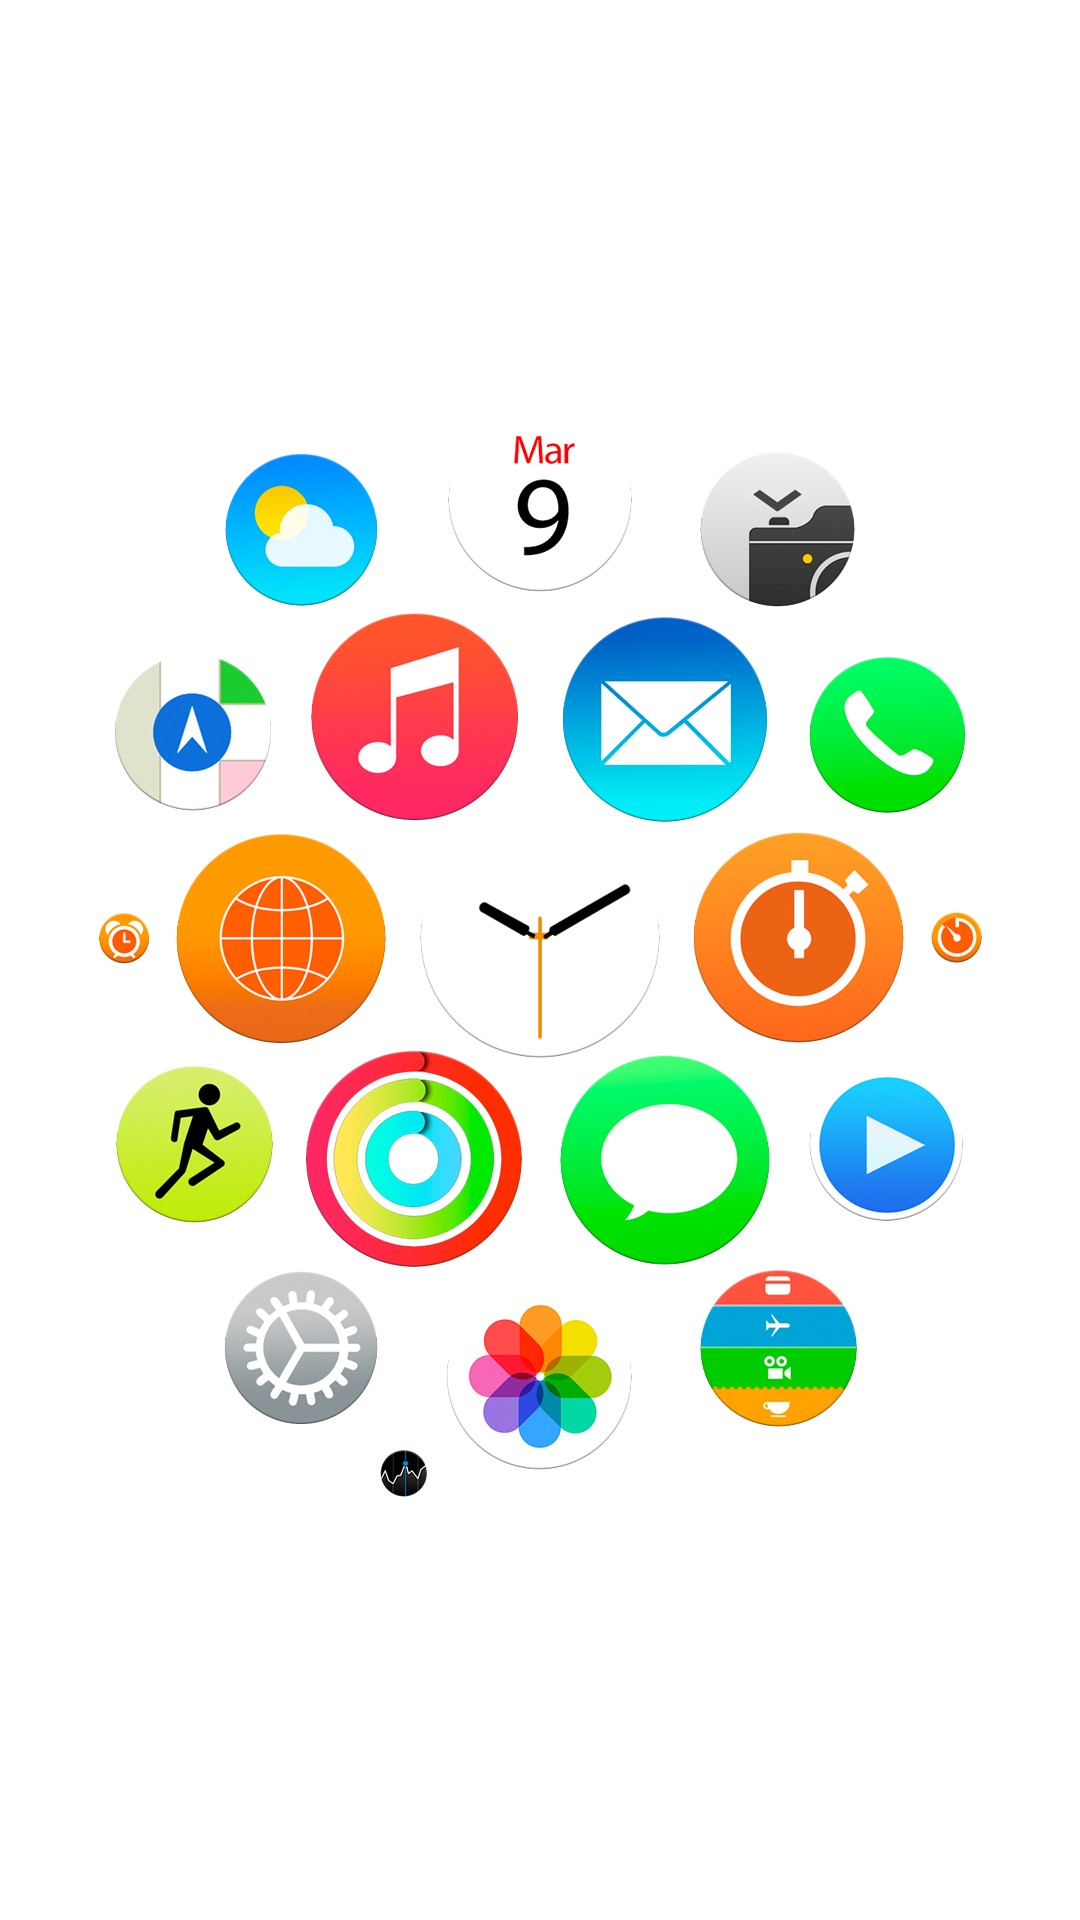 Download Apple Watch Inspired Wallpapers For Iphone Ipad And Mac